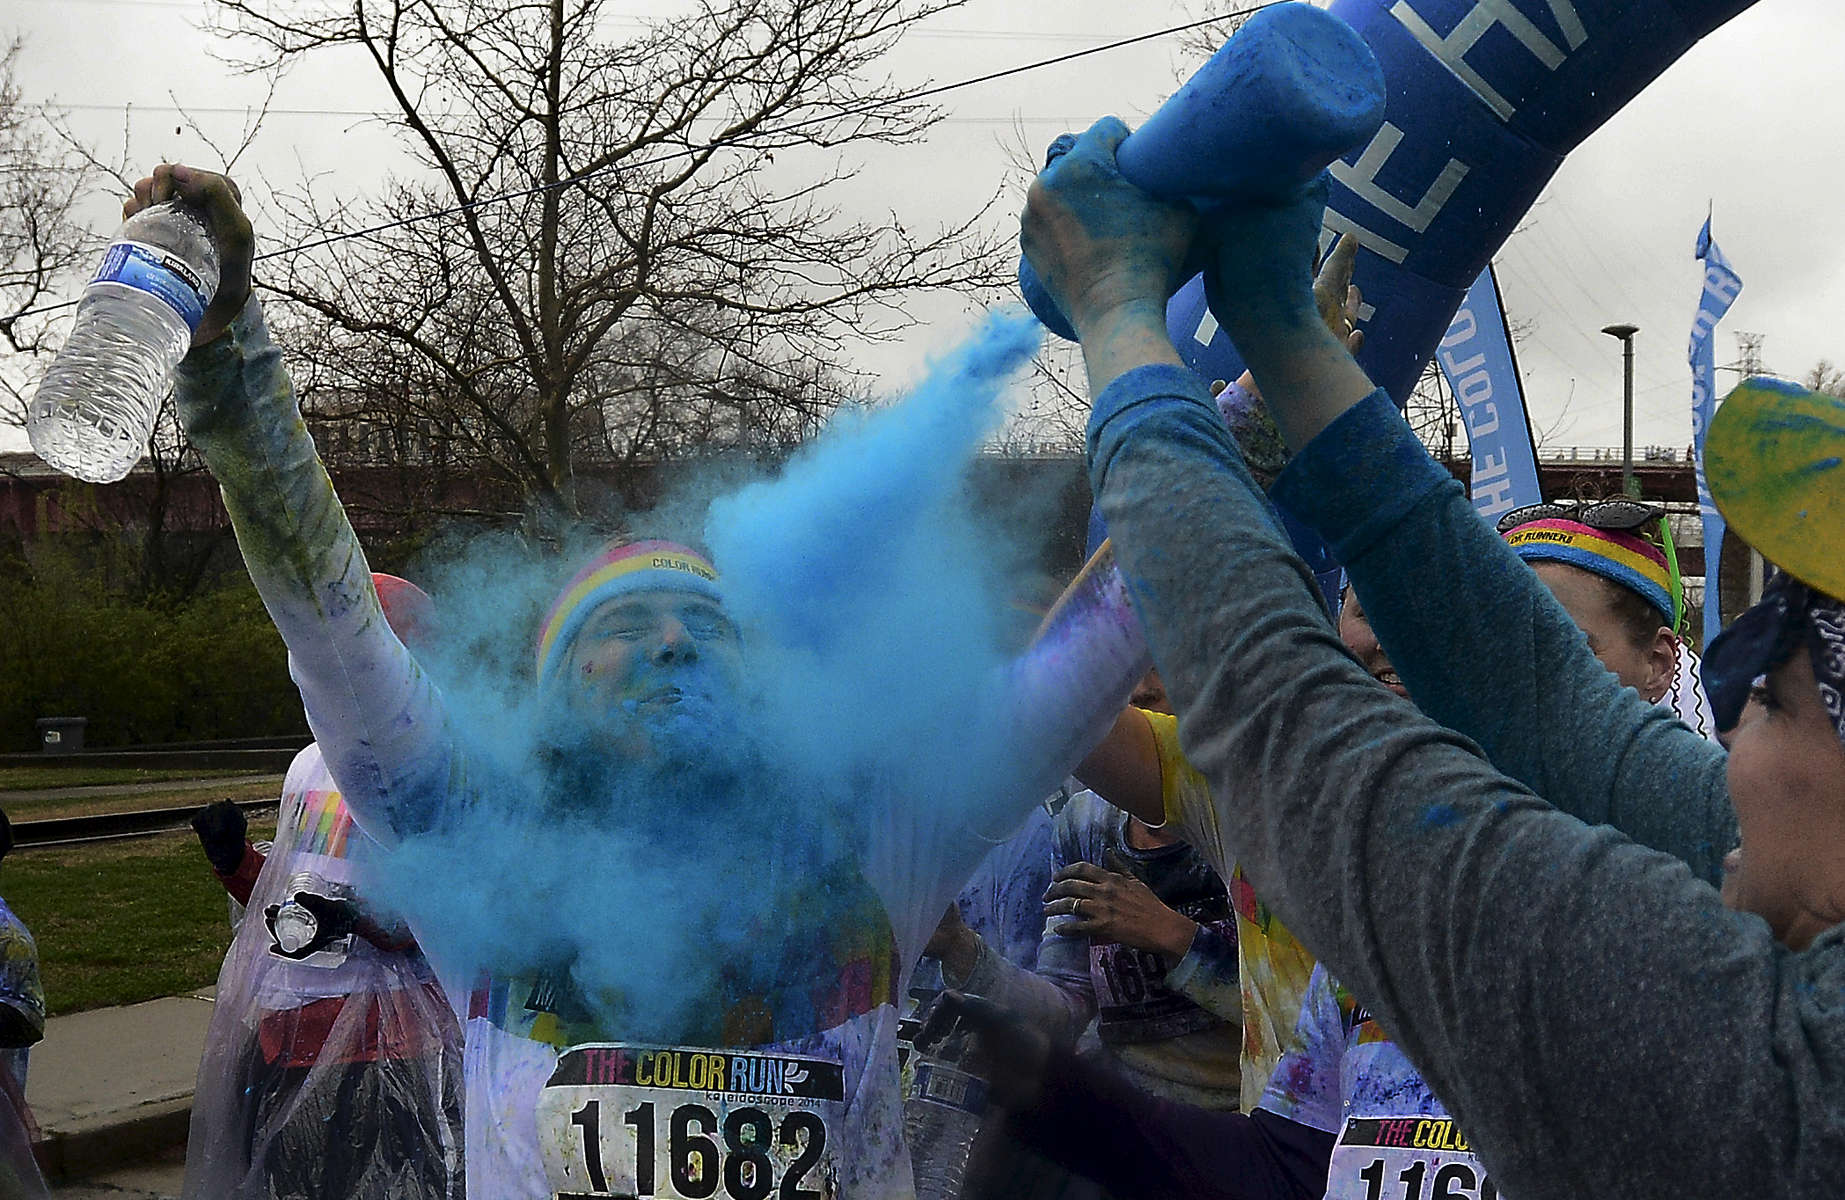 A runner gets squirted with blue powderin the 5K Color Run in Nashville, Tenn. (Mark Zaleski/ For The Tennessean)